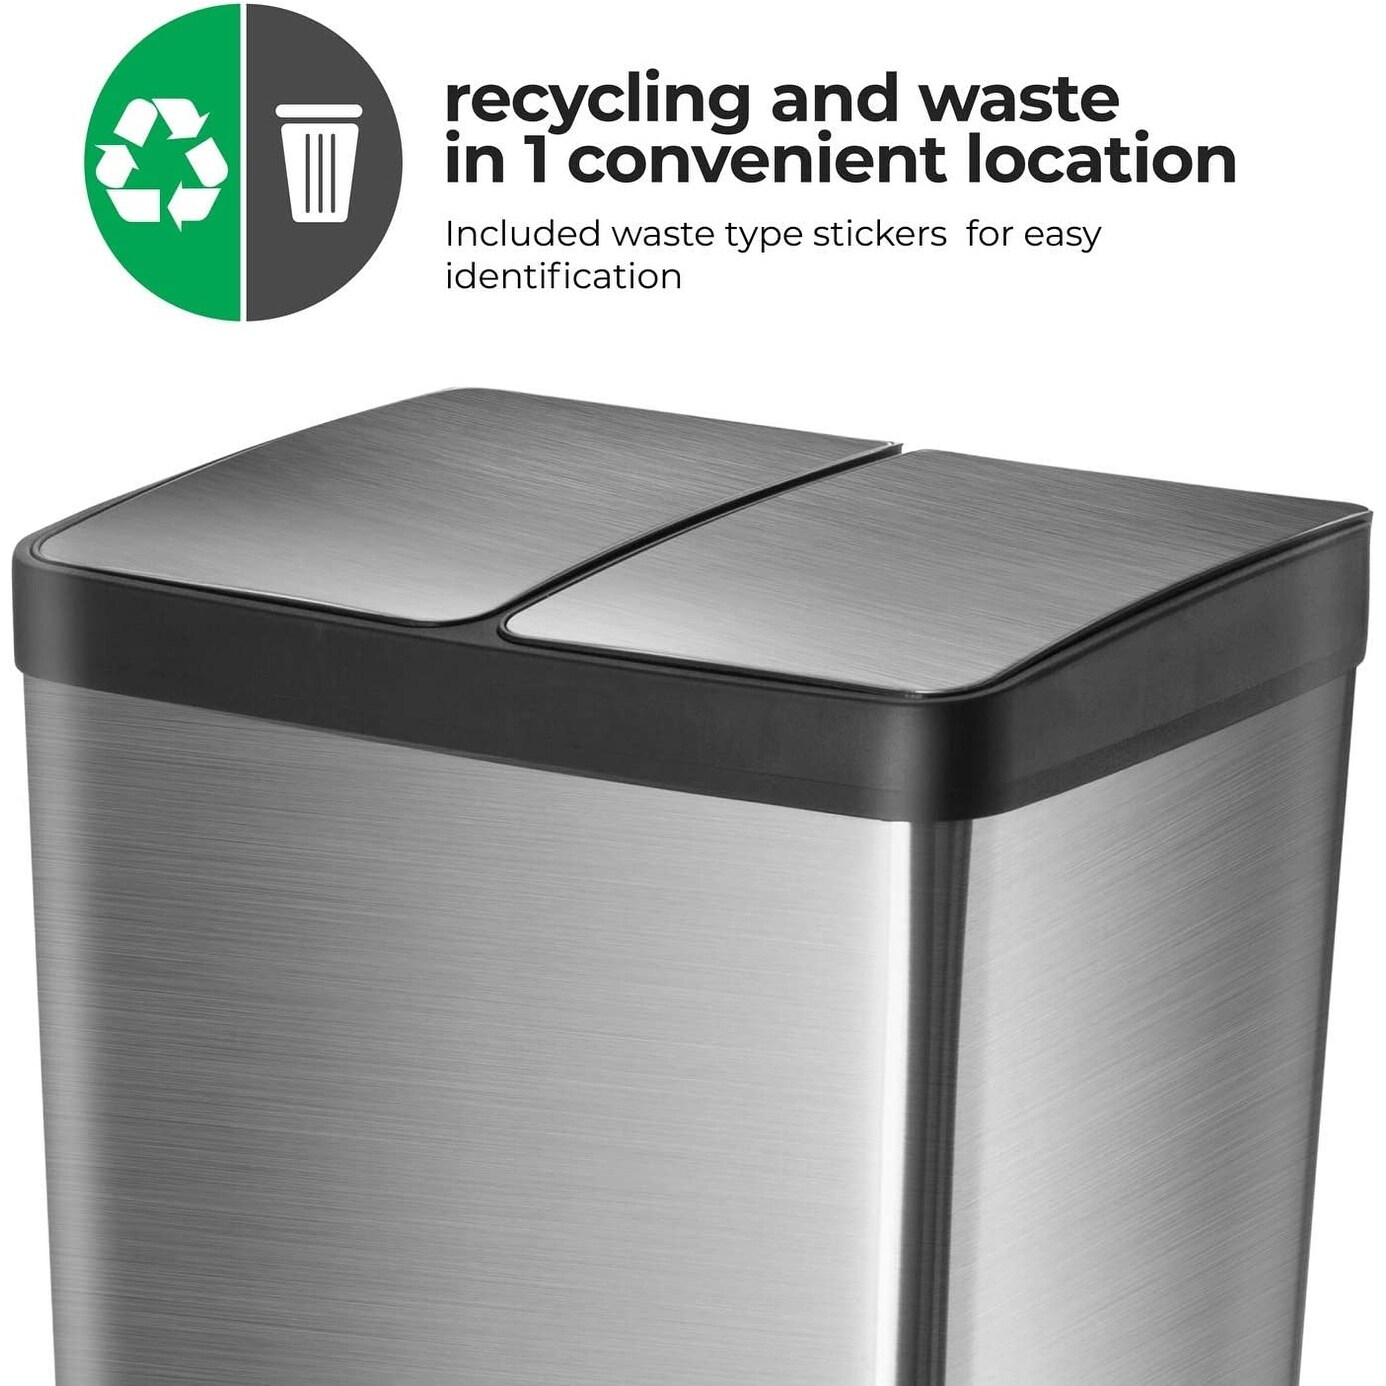 https://ak1.ostkcdn.com/images/products/is/images/direct/8e2d569809f53547411169939ca6ff8ef1c43ae2/Home-Zone-Living-13-Gallon-Kitchen-Trash-Can%2C-Dual-Compartment-Recycle-Combo%2C-Slim-Body-Stainless-Steel-Design.jpg